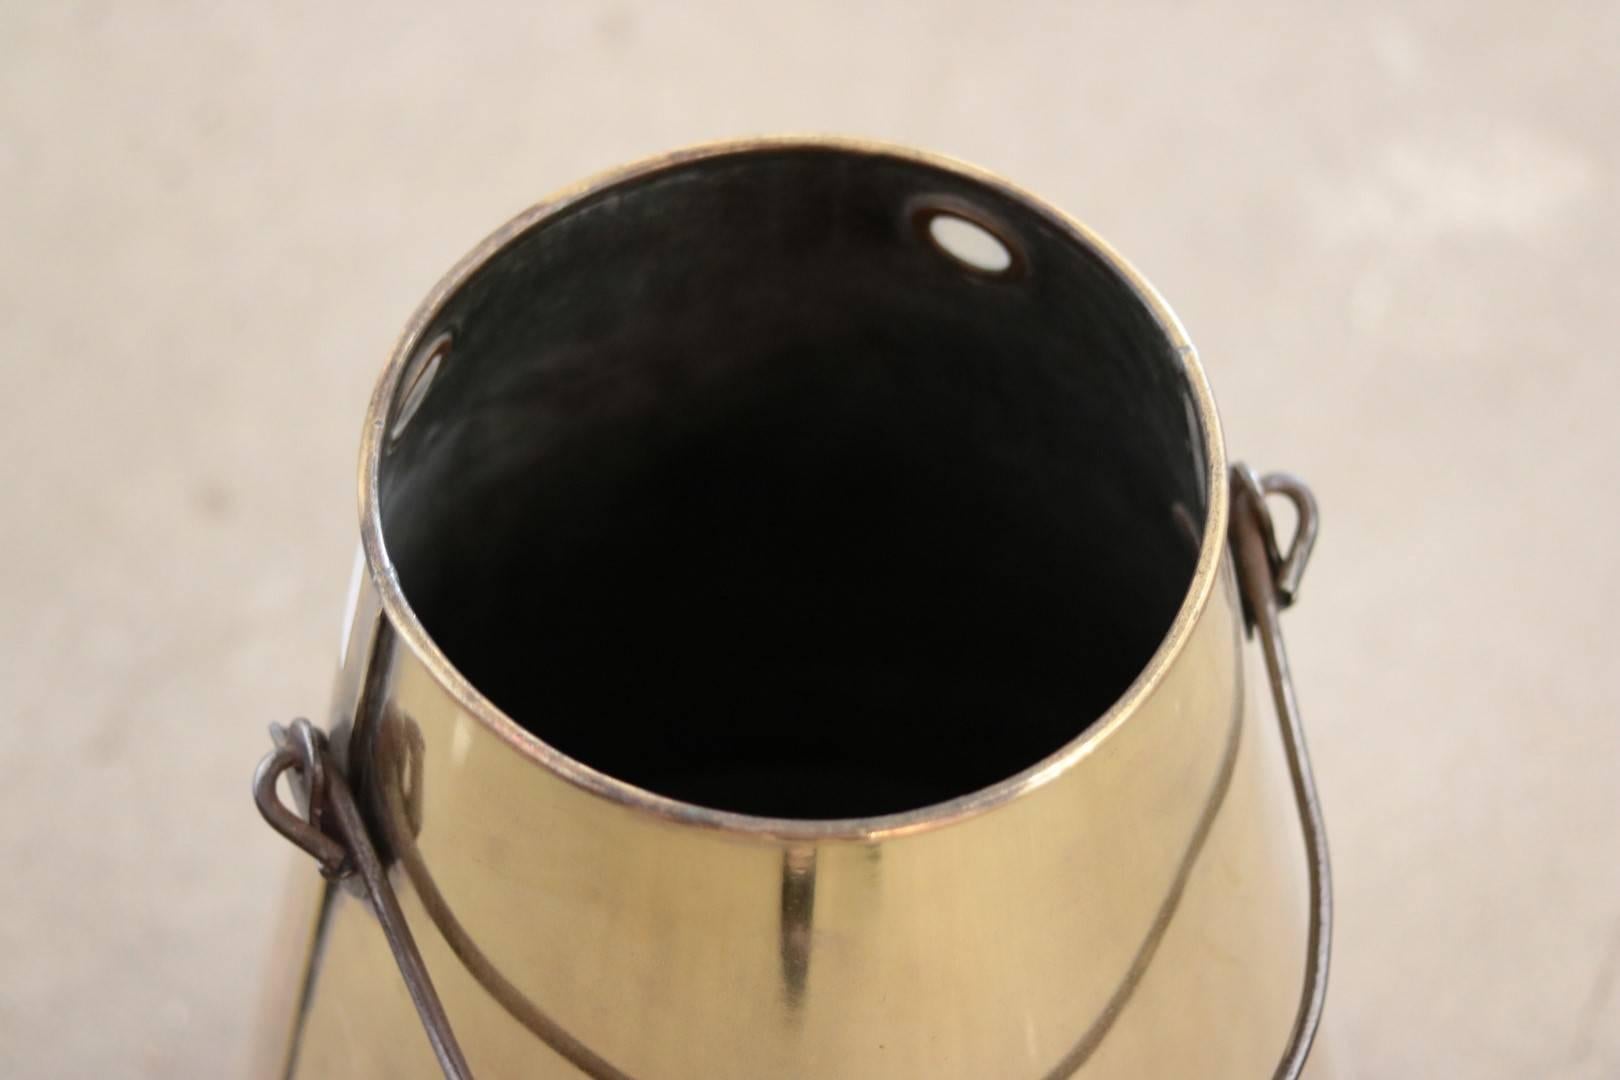 Authentic brass cream bucket with handle.

Dimensions: 19